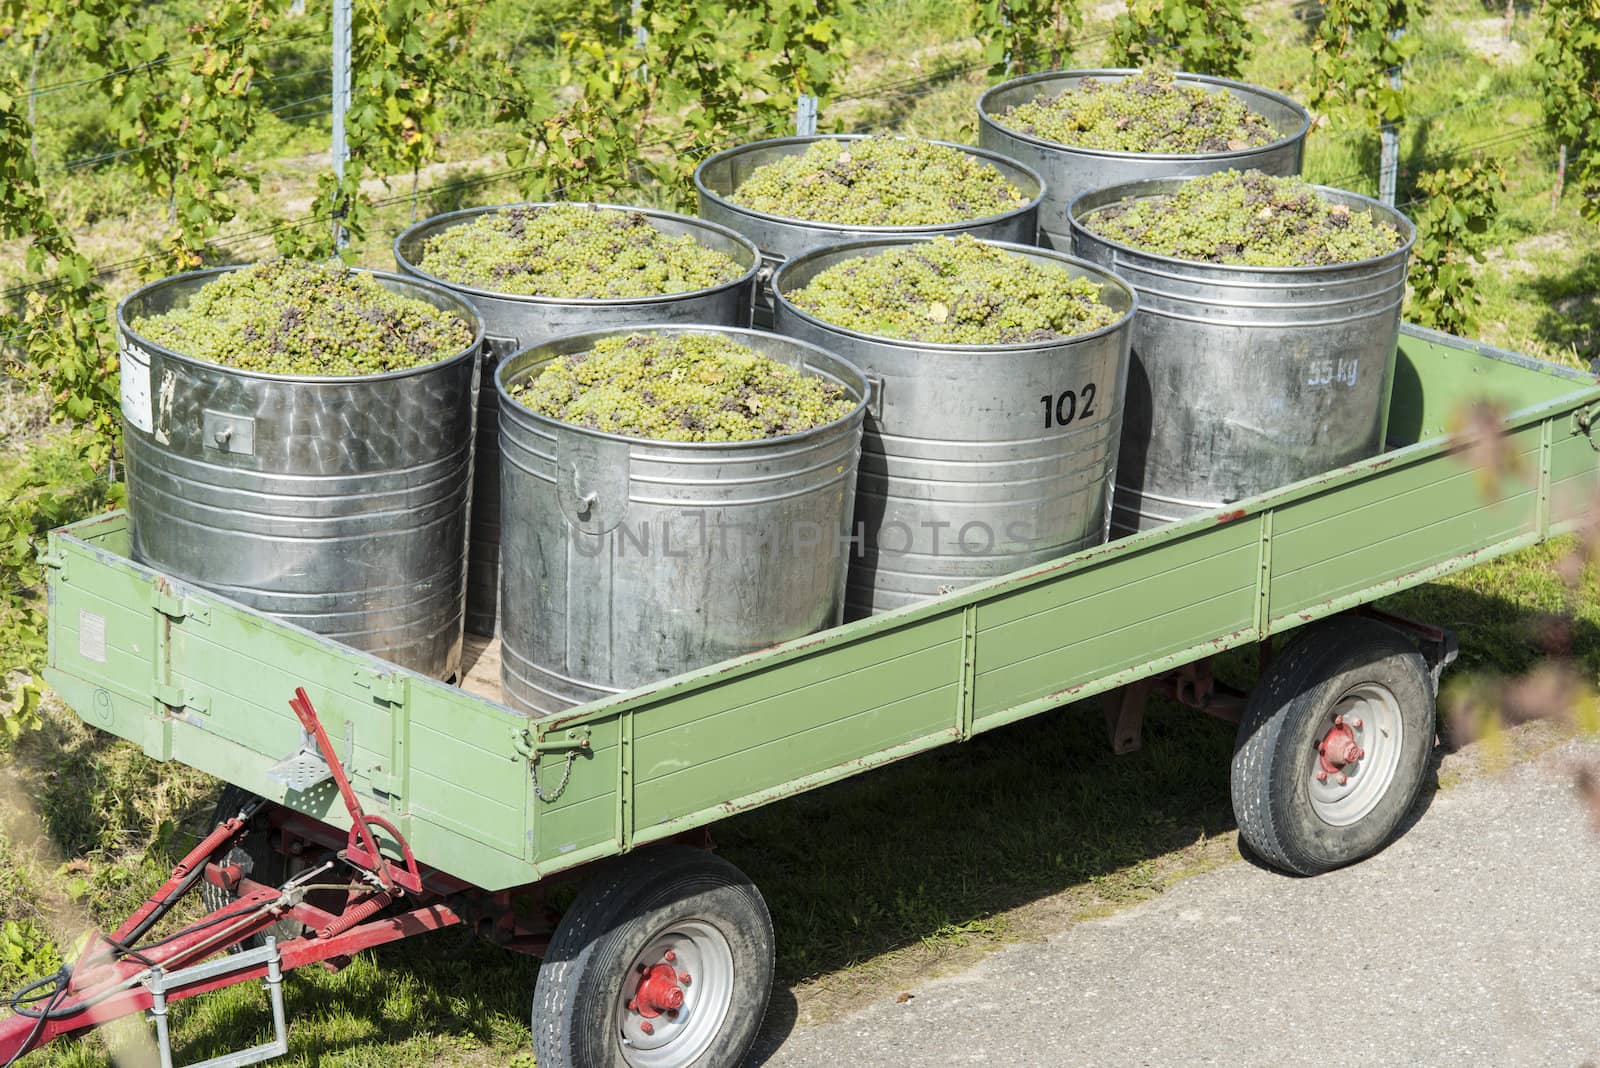 Containers Full Of White Grapes On The Trailer By Harvest Time